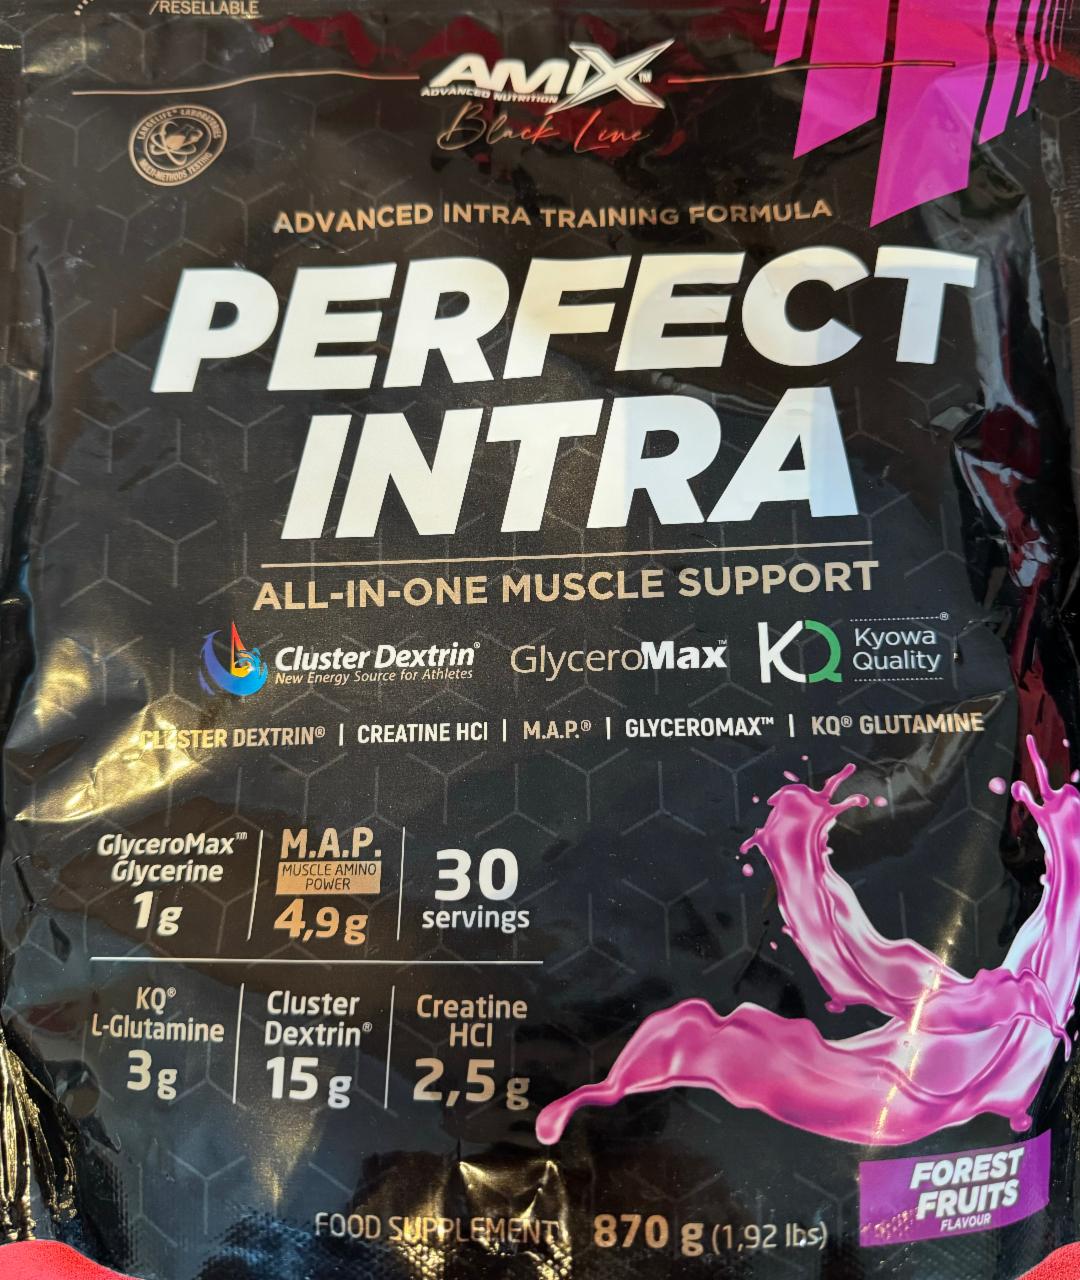 Fotografie - Perfect Intra All-in-one muscle support Forest Fruit Amix Nutrition